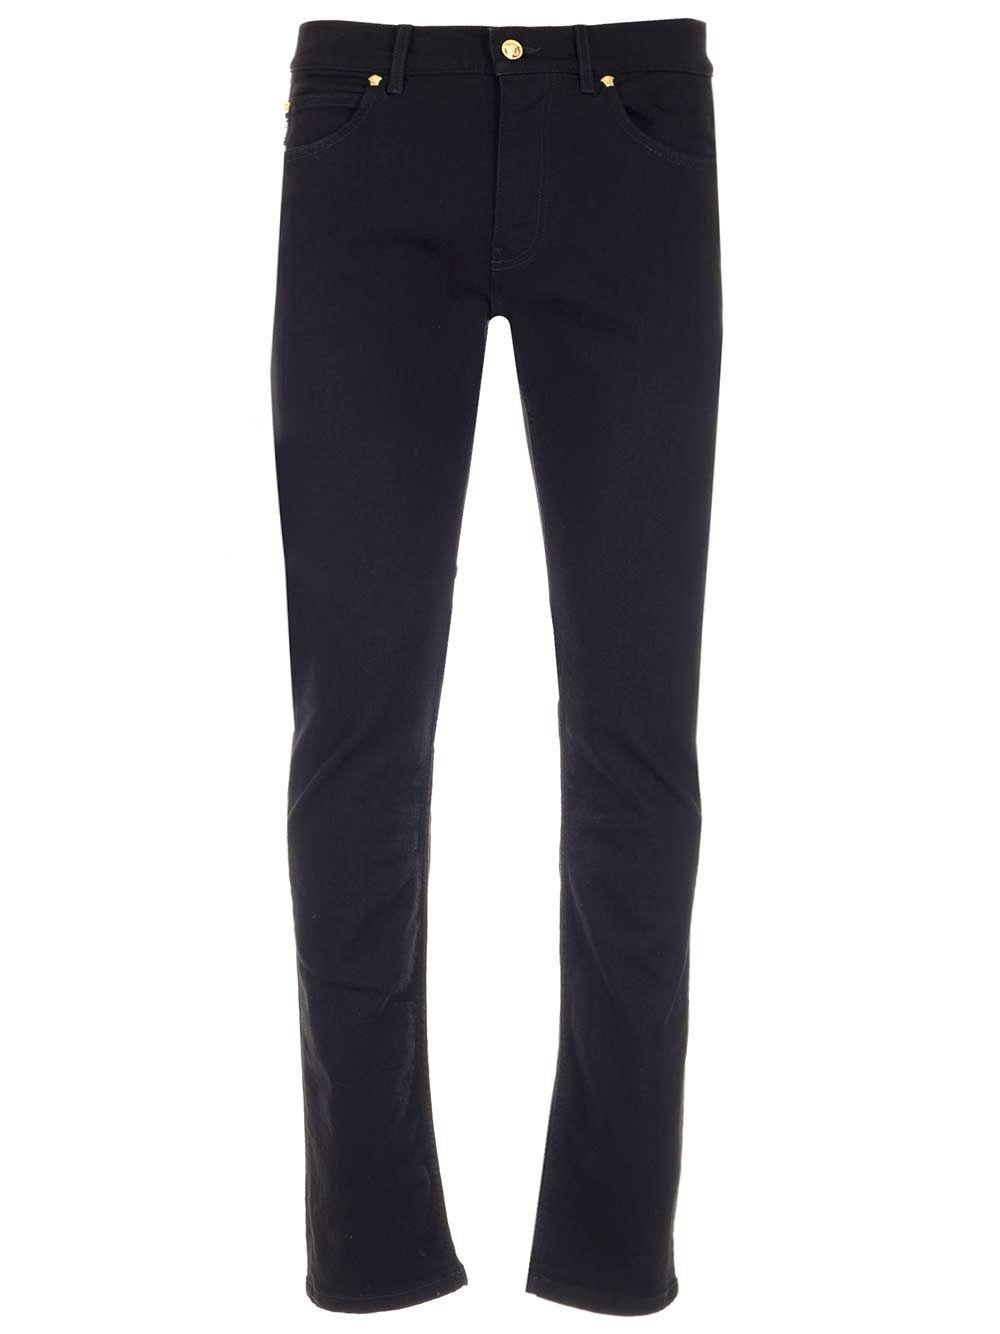 Versace A818321a009081d040 Cotton Pants in Black for Men - Save 33% - Lyst